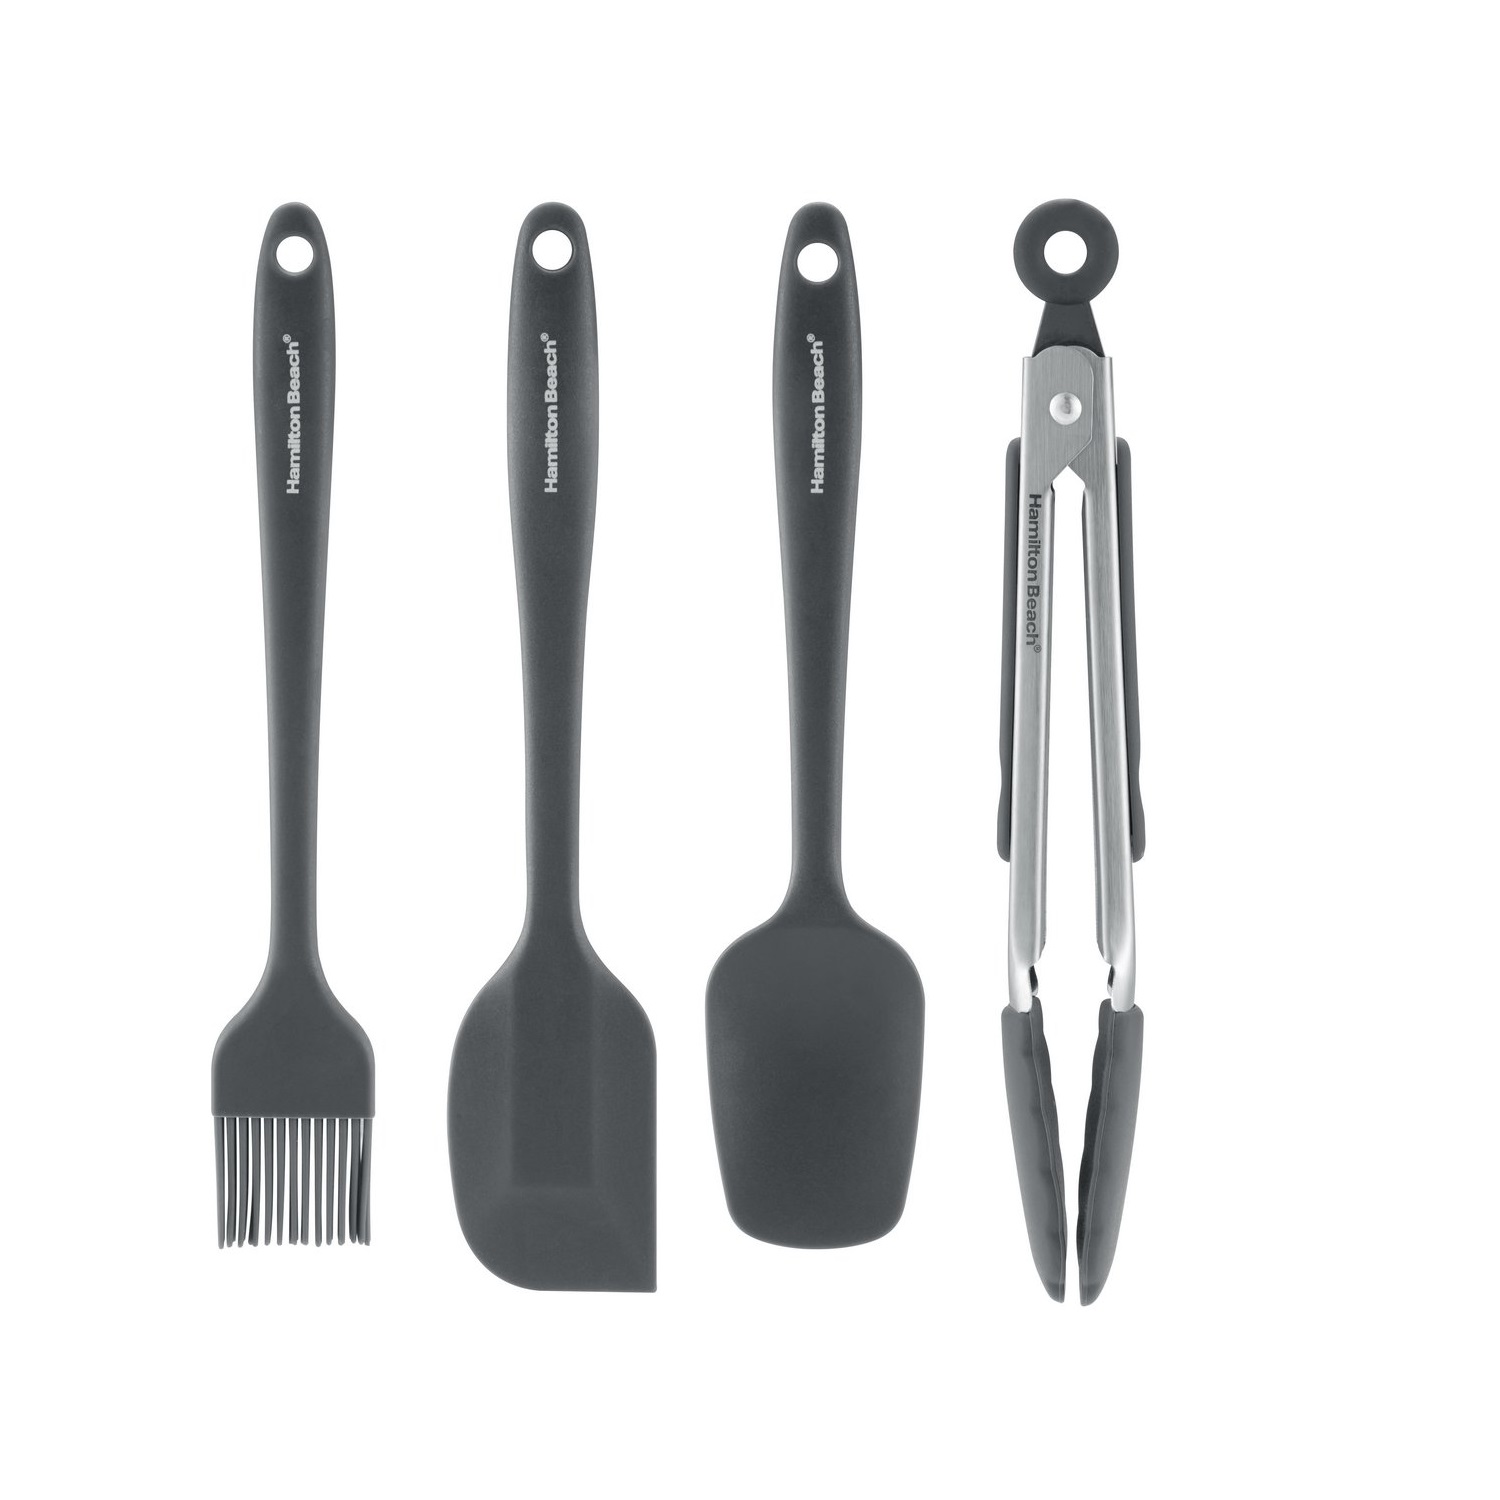 Silicone 6pc Baking Tool Set with Beech Wood Handle